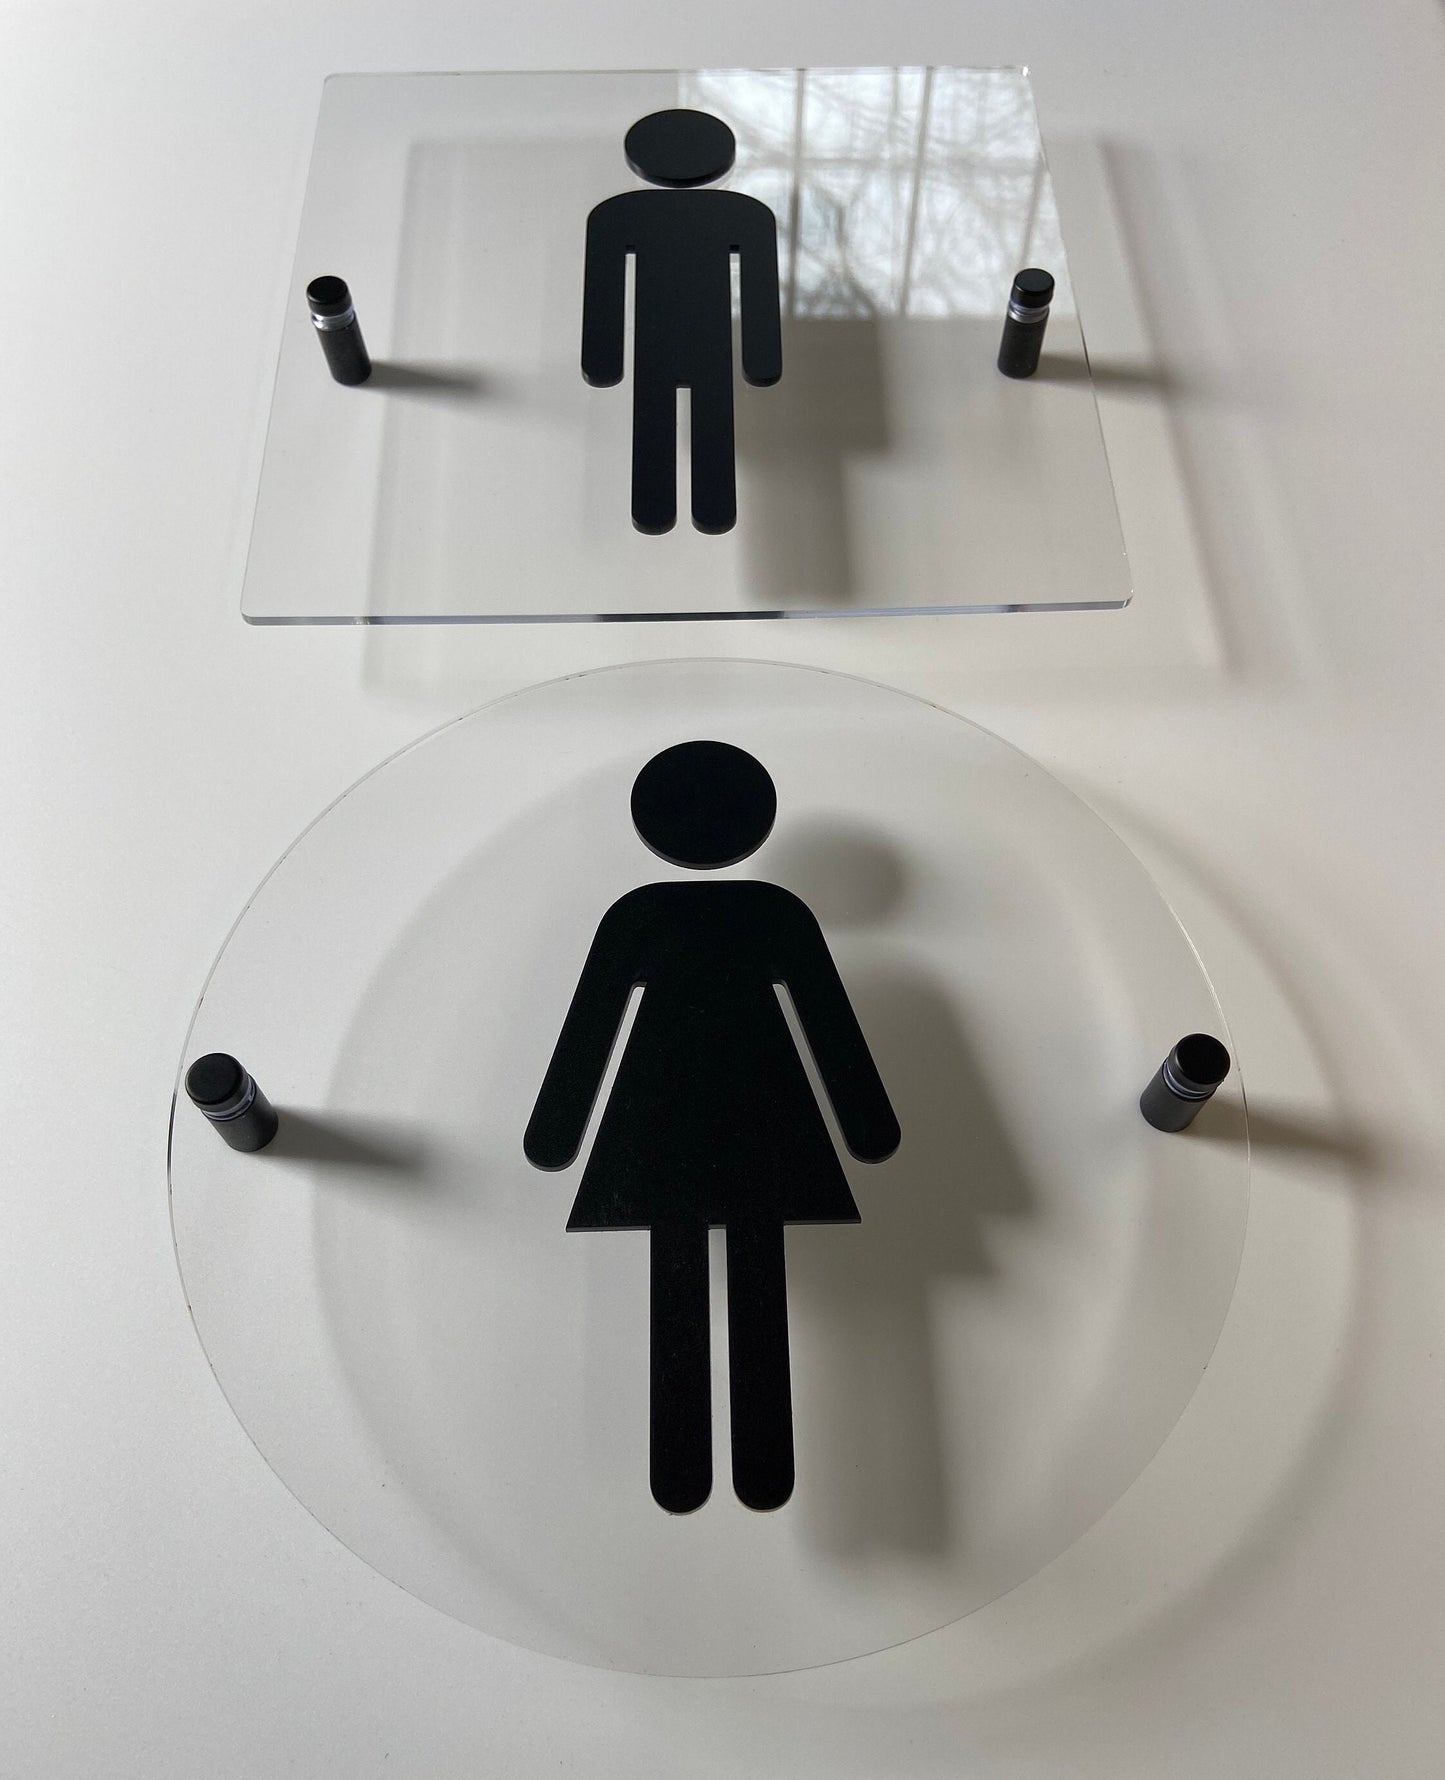 CrossFit Gym Clear Acrylic Floating Restroom Signs | Men Women Handicap Bathroom 9 x 9 "| Priced per sign not as a set